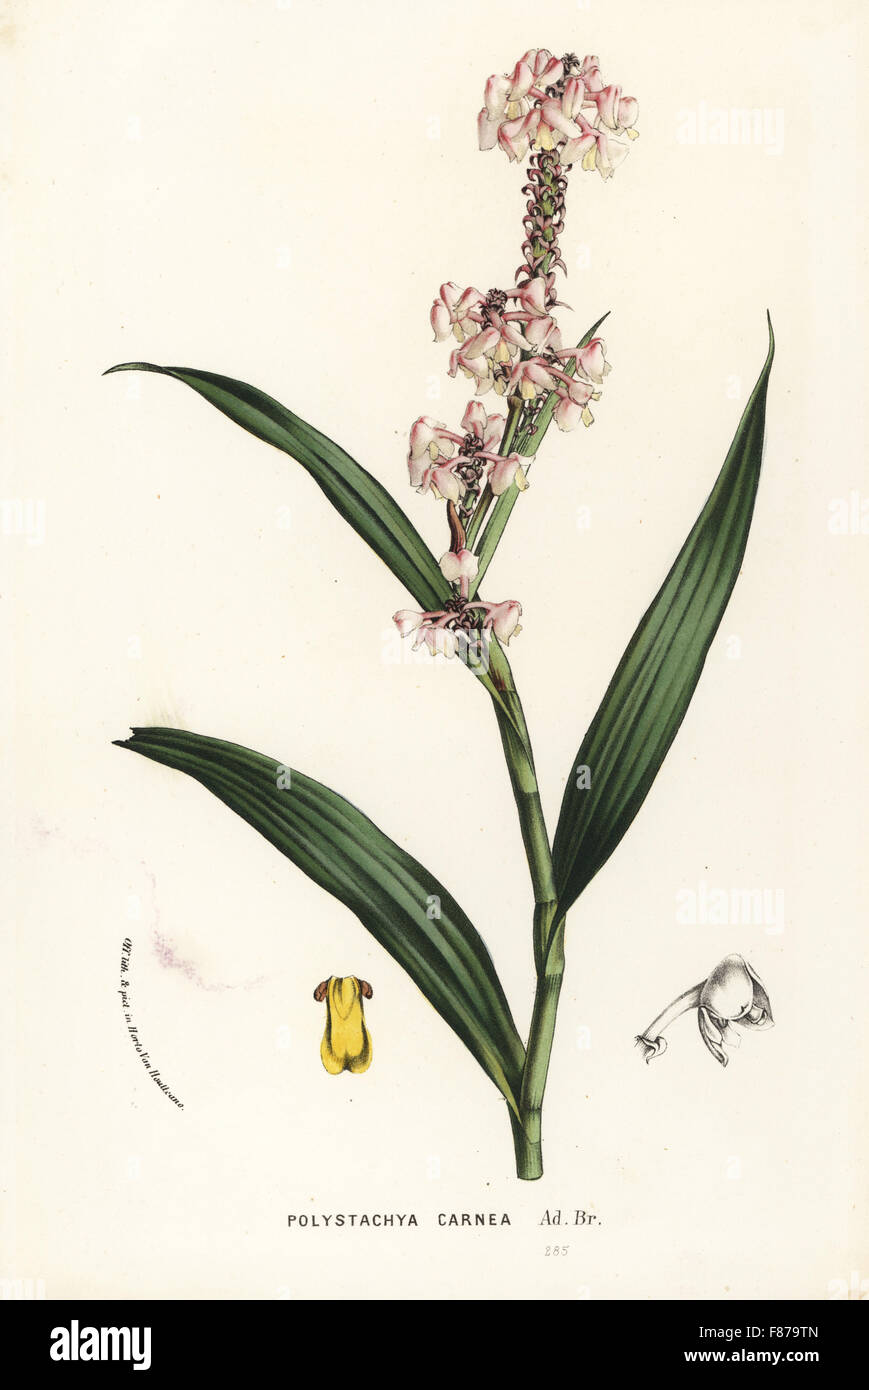 Polystachya rhodoptera orchid (Polystachya carnea). Handcoloured lithograph from Louis van Houtte and Charles Lemaire's Flowers of the Gardens and Hothouses of Europe, Flore des Serres et des Jardins de l'Europe, Ghent, Belgium, 1862-65. Stock Photo